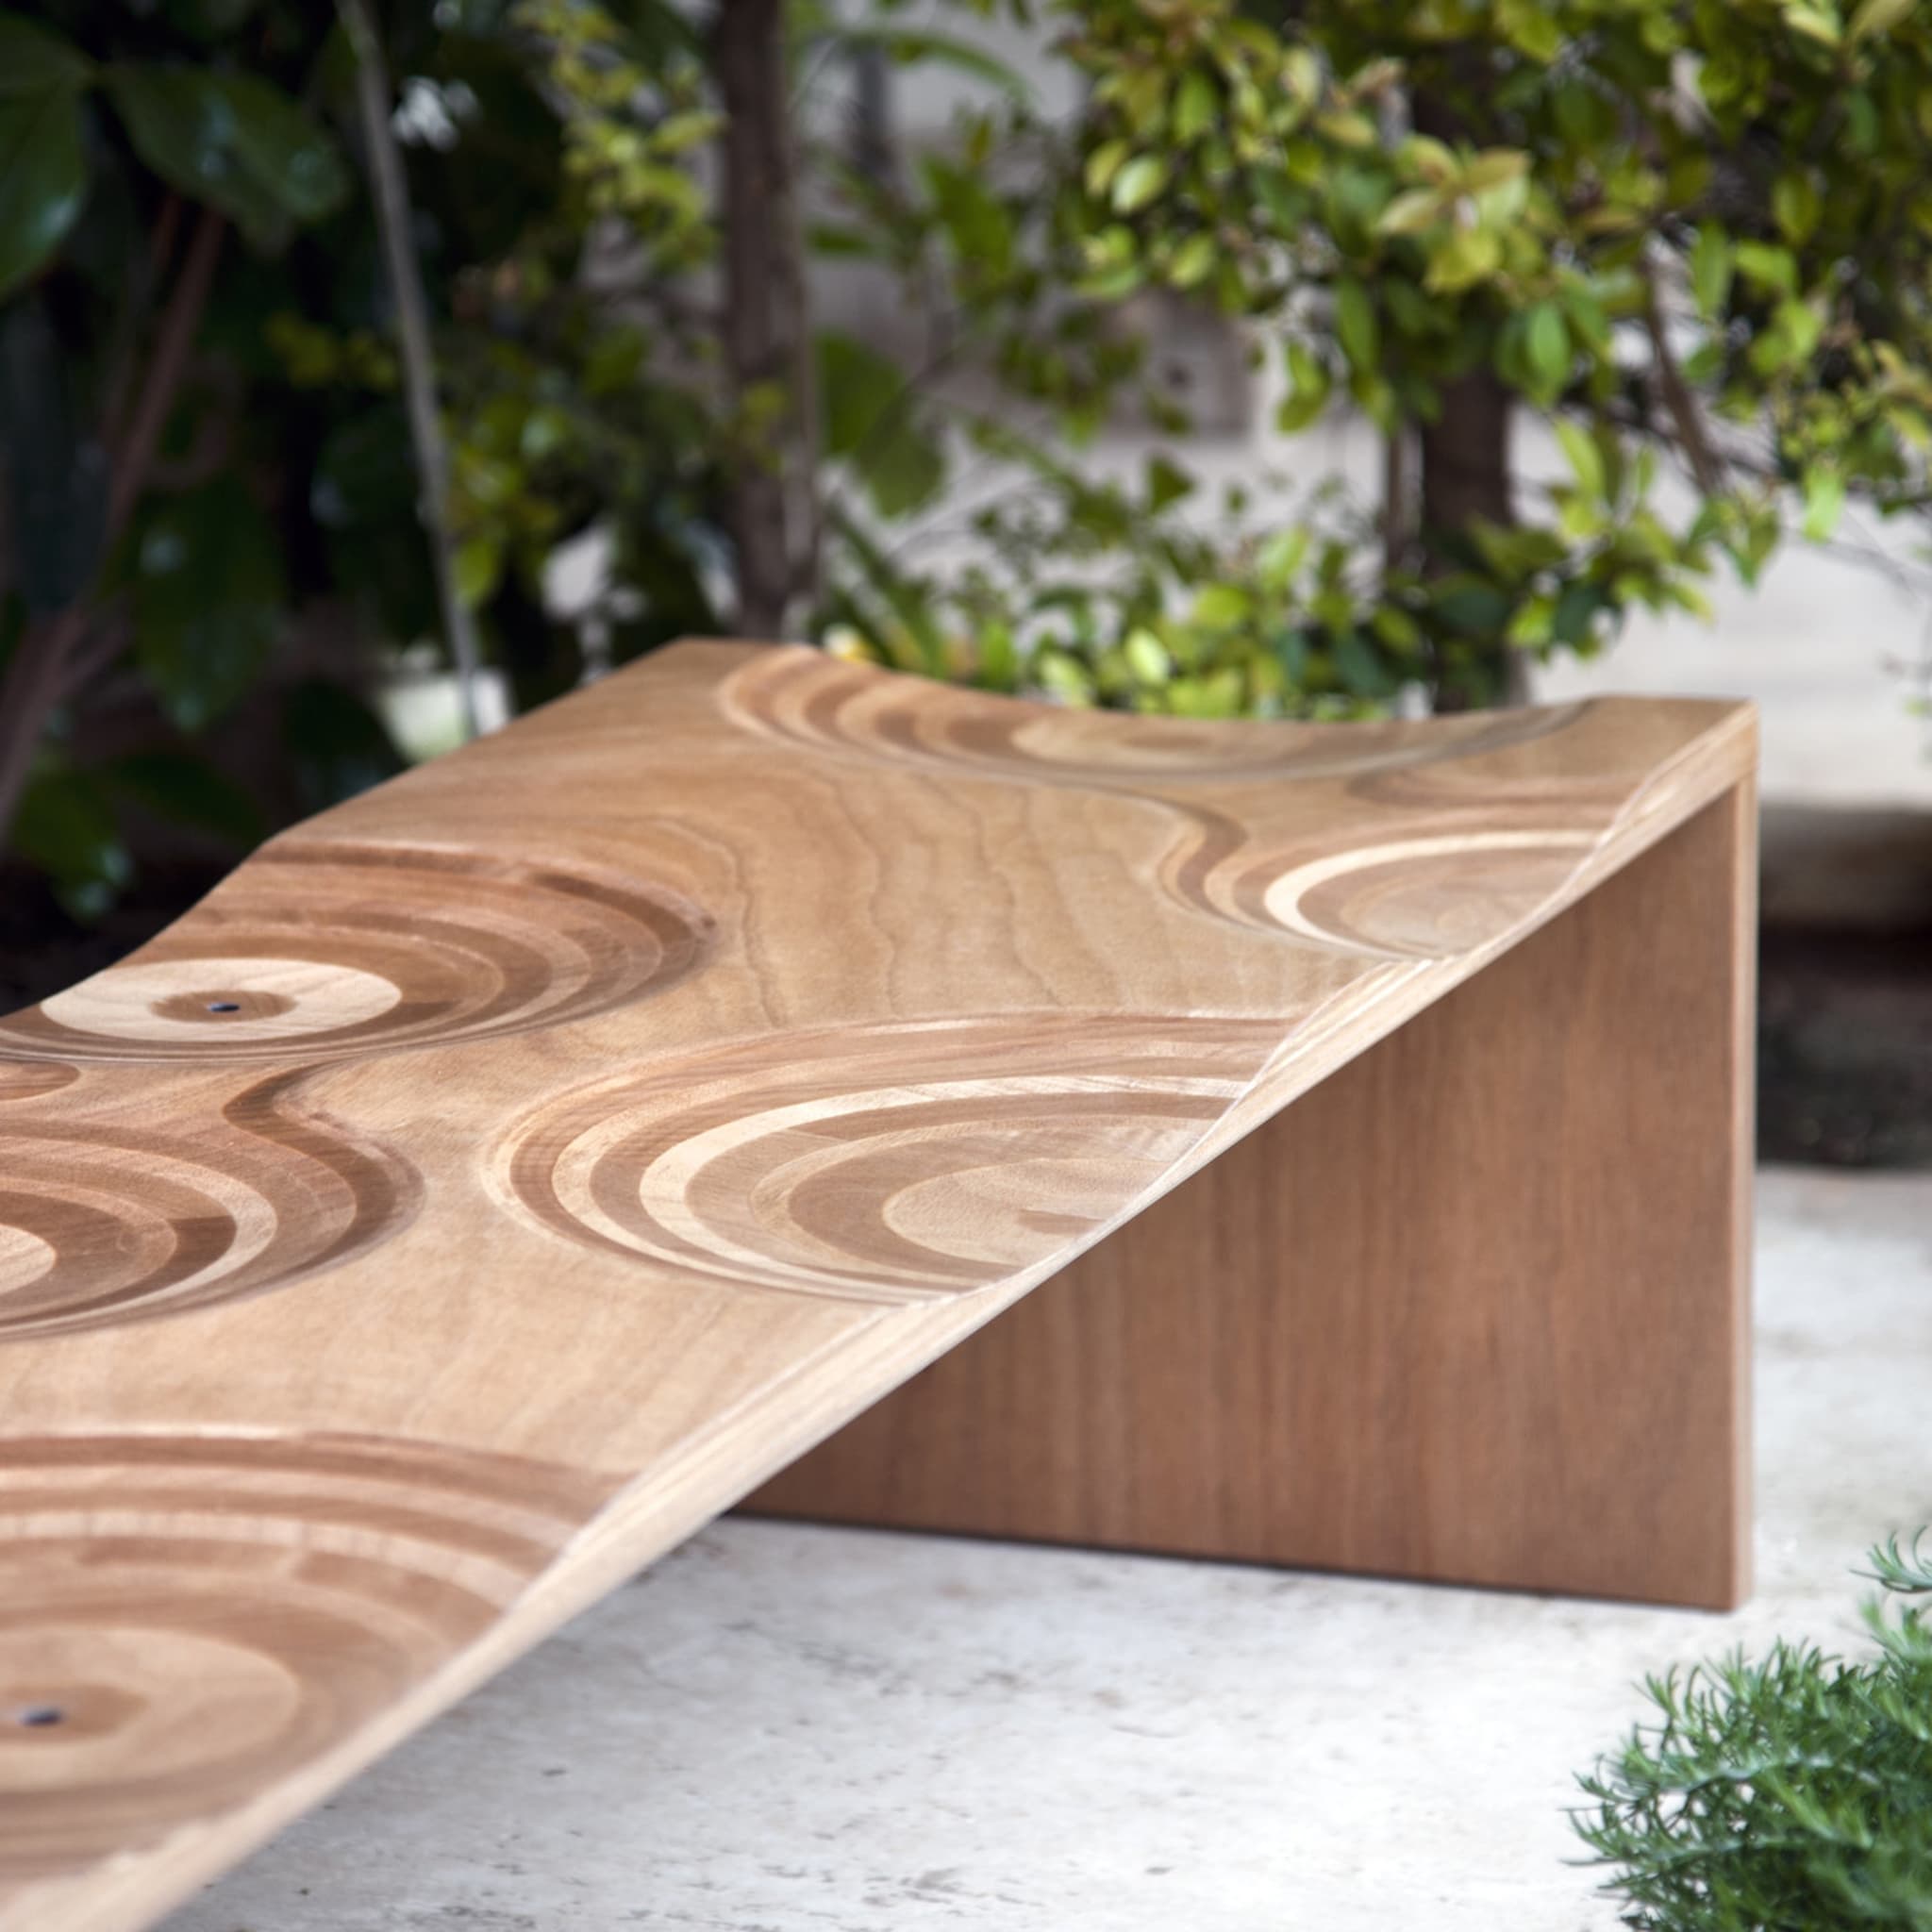 Ripples Outdoor Bench by Toyo Ito - Alternative view 2